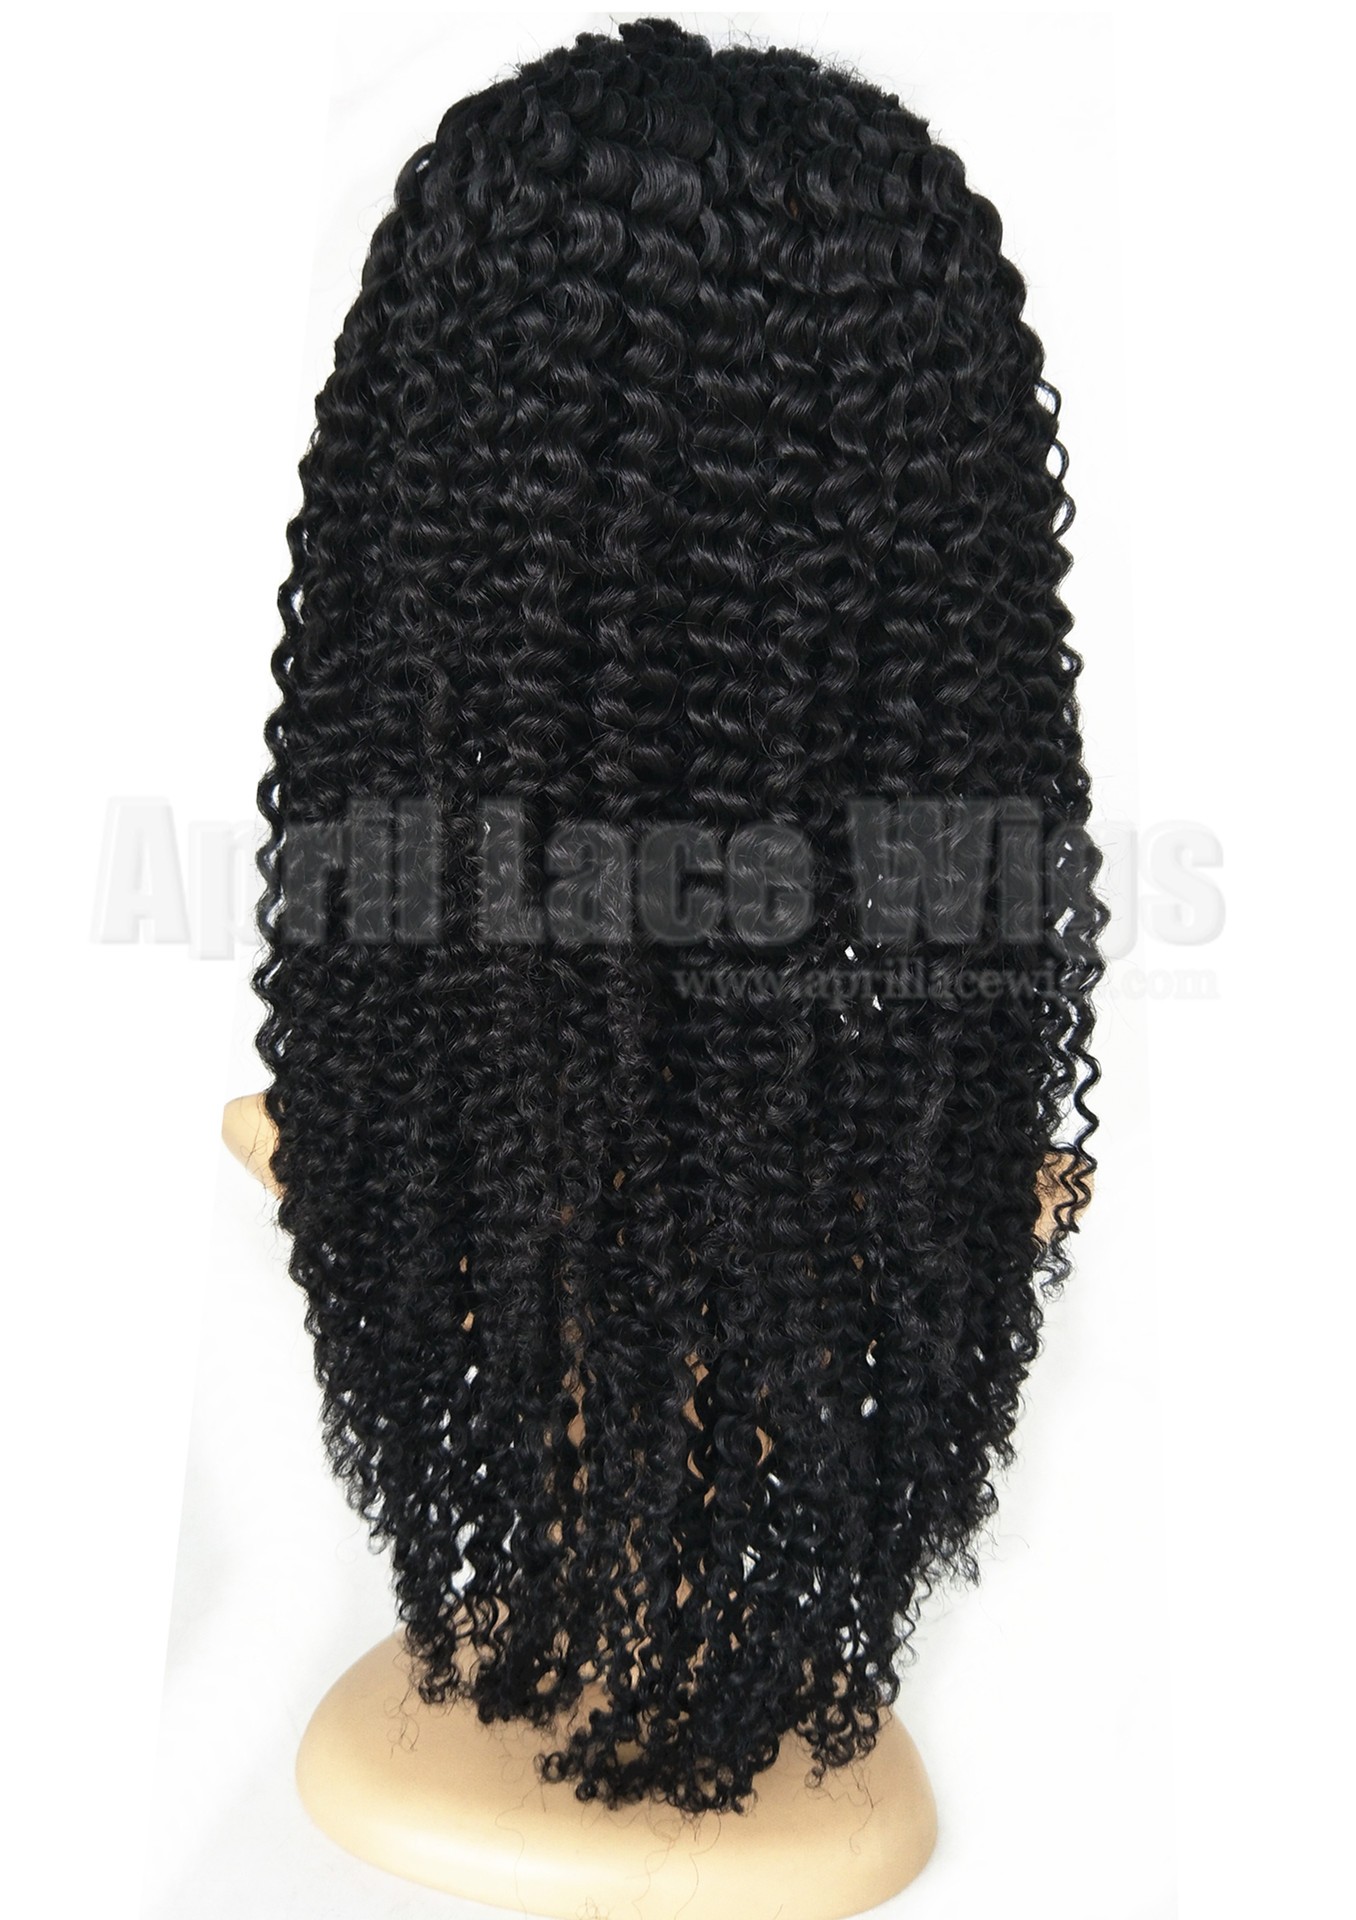 Jerry curl lace front wig for black women